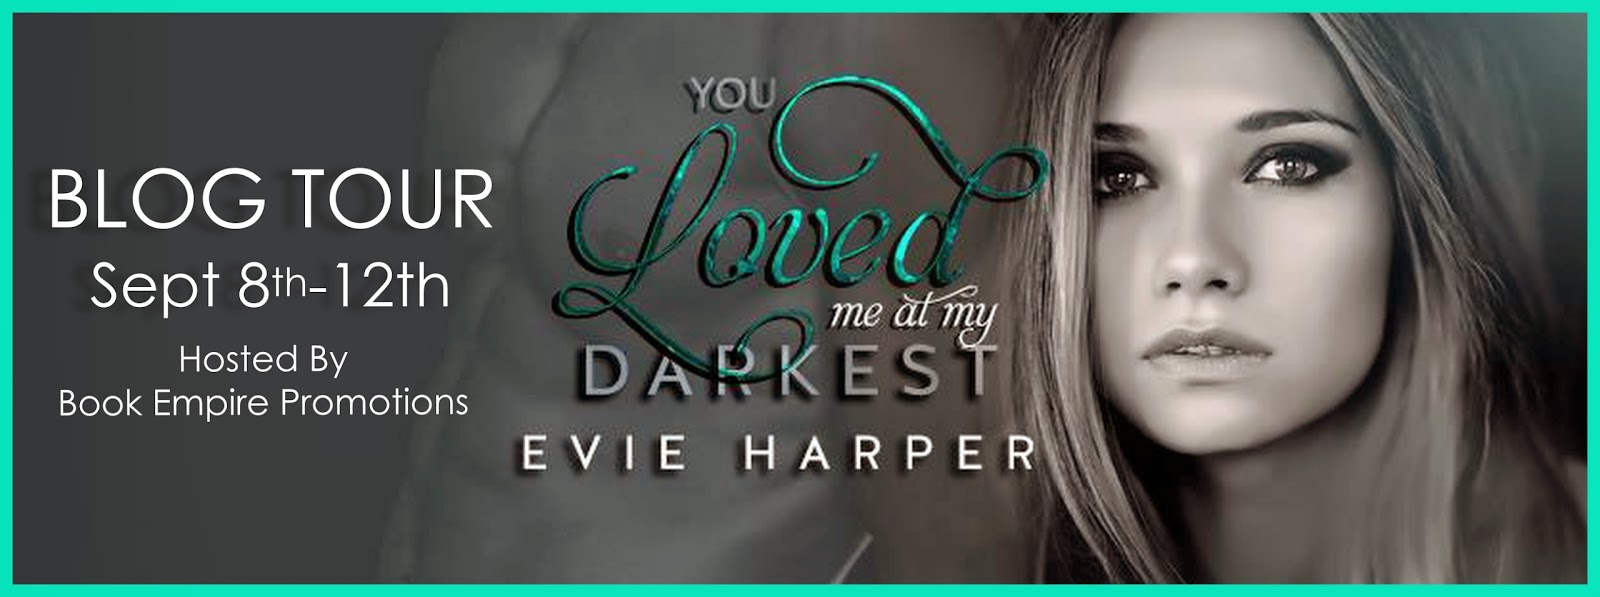 {Excerpt+Giveaway} You Loved me at my Darkest by @EvieHarper_Auth